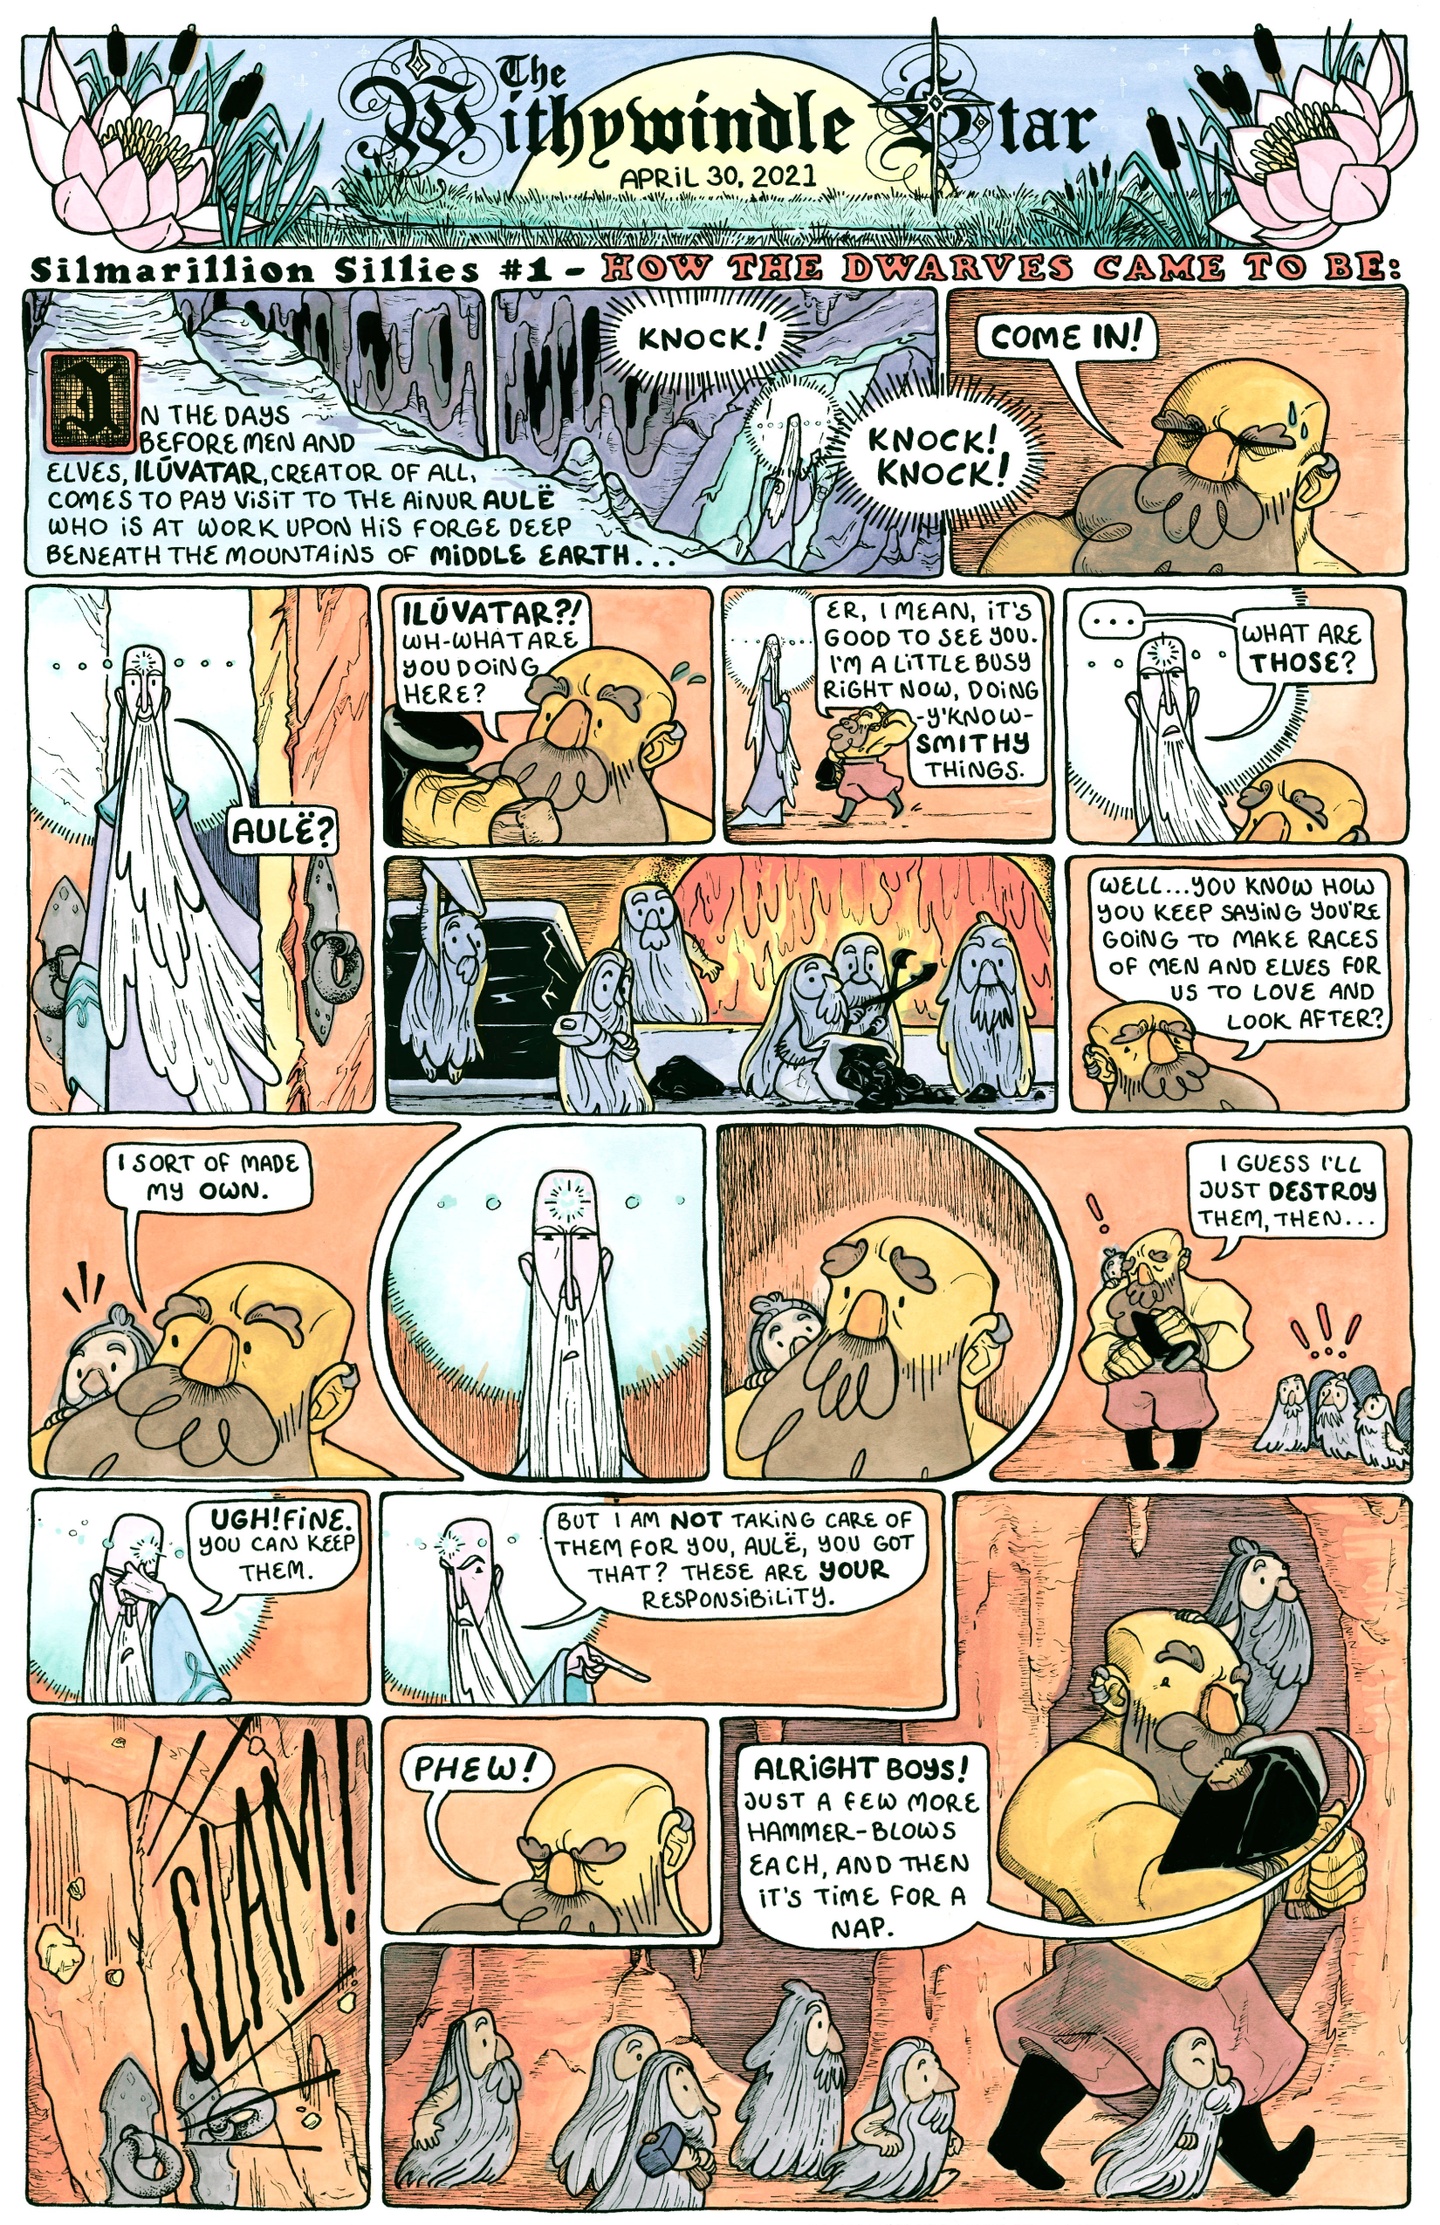 Comic illustration featuring the creation of dwarves from Silmarillion